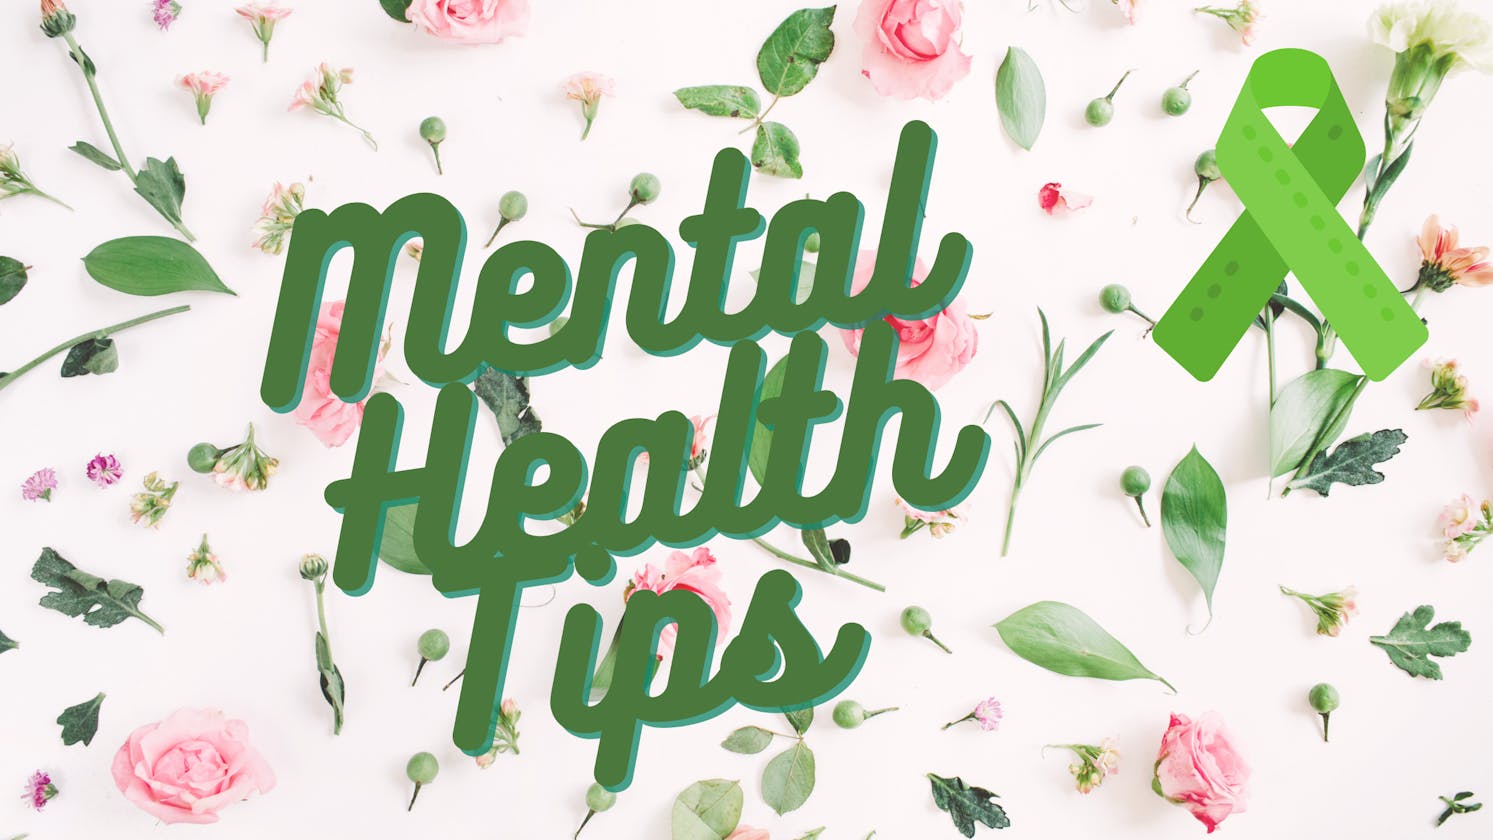 Mental Health Tips and Tricks for the Tech World